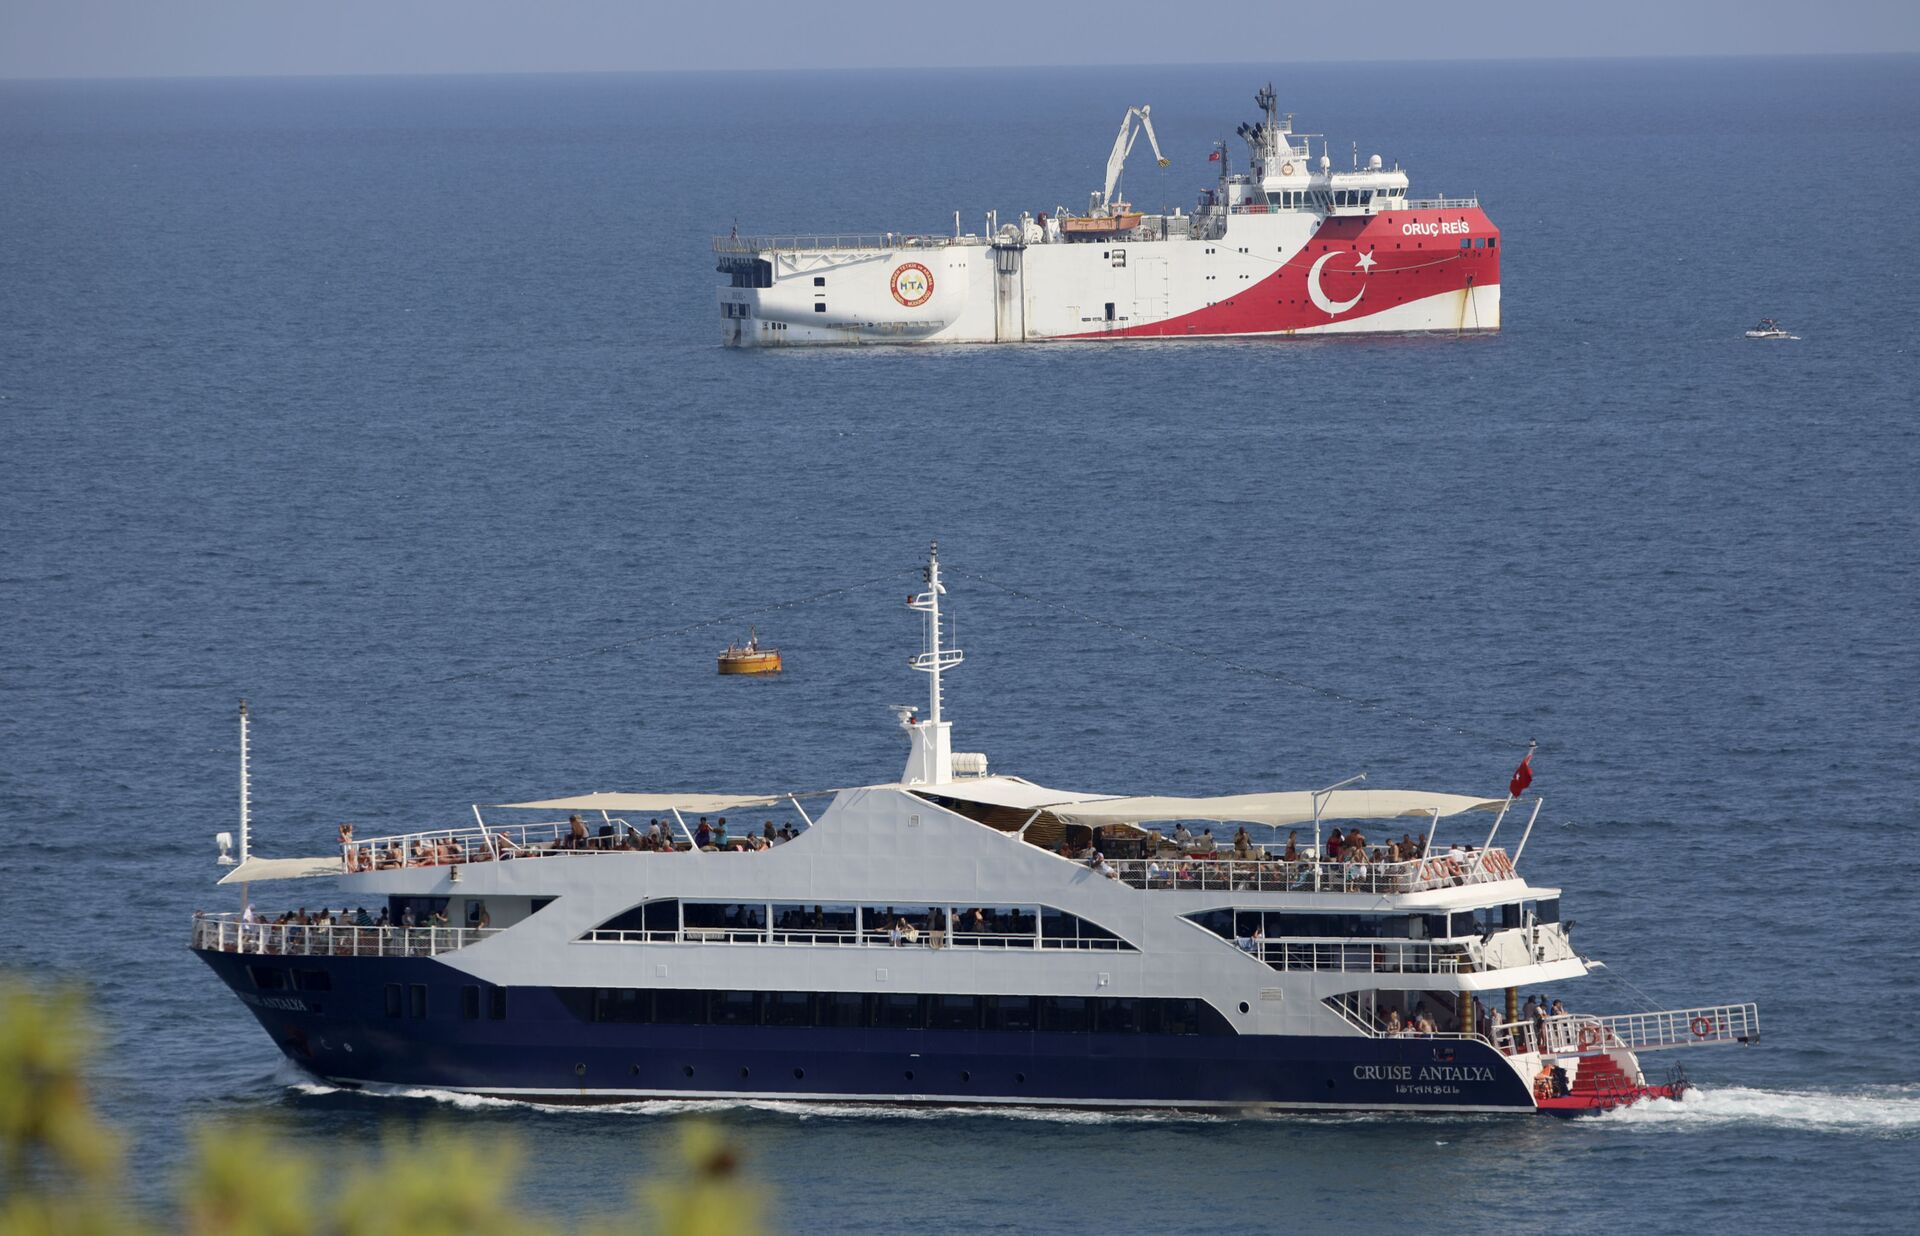 Turkey's research vessel, Oruc Reis, rear, anchored off the coast of Antalya on the Mediterranean, Turkey, Sunday, Sept. 13, 2020. Greece's Prime Minister Kyriakos Mitsotakis welcomed the return of a Turkish survey vessel to port Sunday from a disputed area of the eastern Mediterranean that has been at the heart of a summer stand-off between Greece and Turkey over energy rights. - Sputnik International, 1920, 07.09.2021